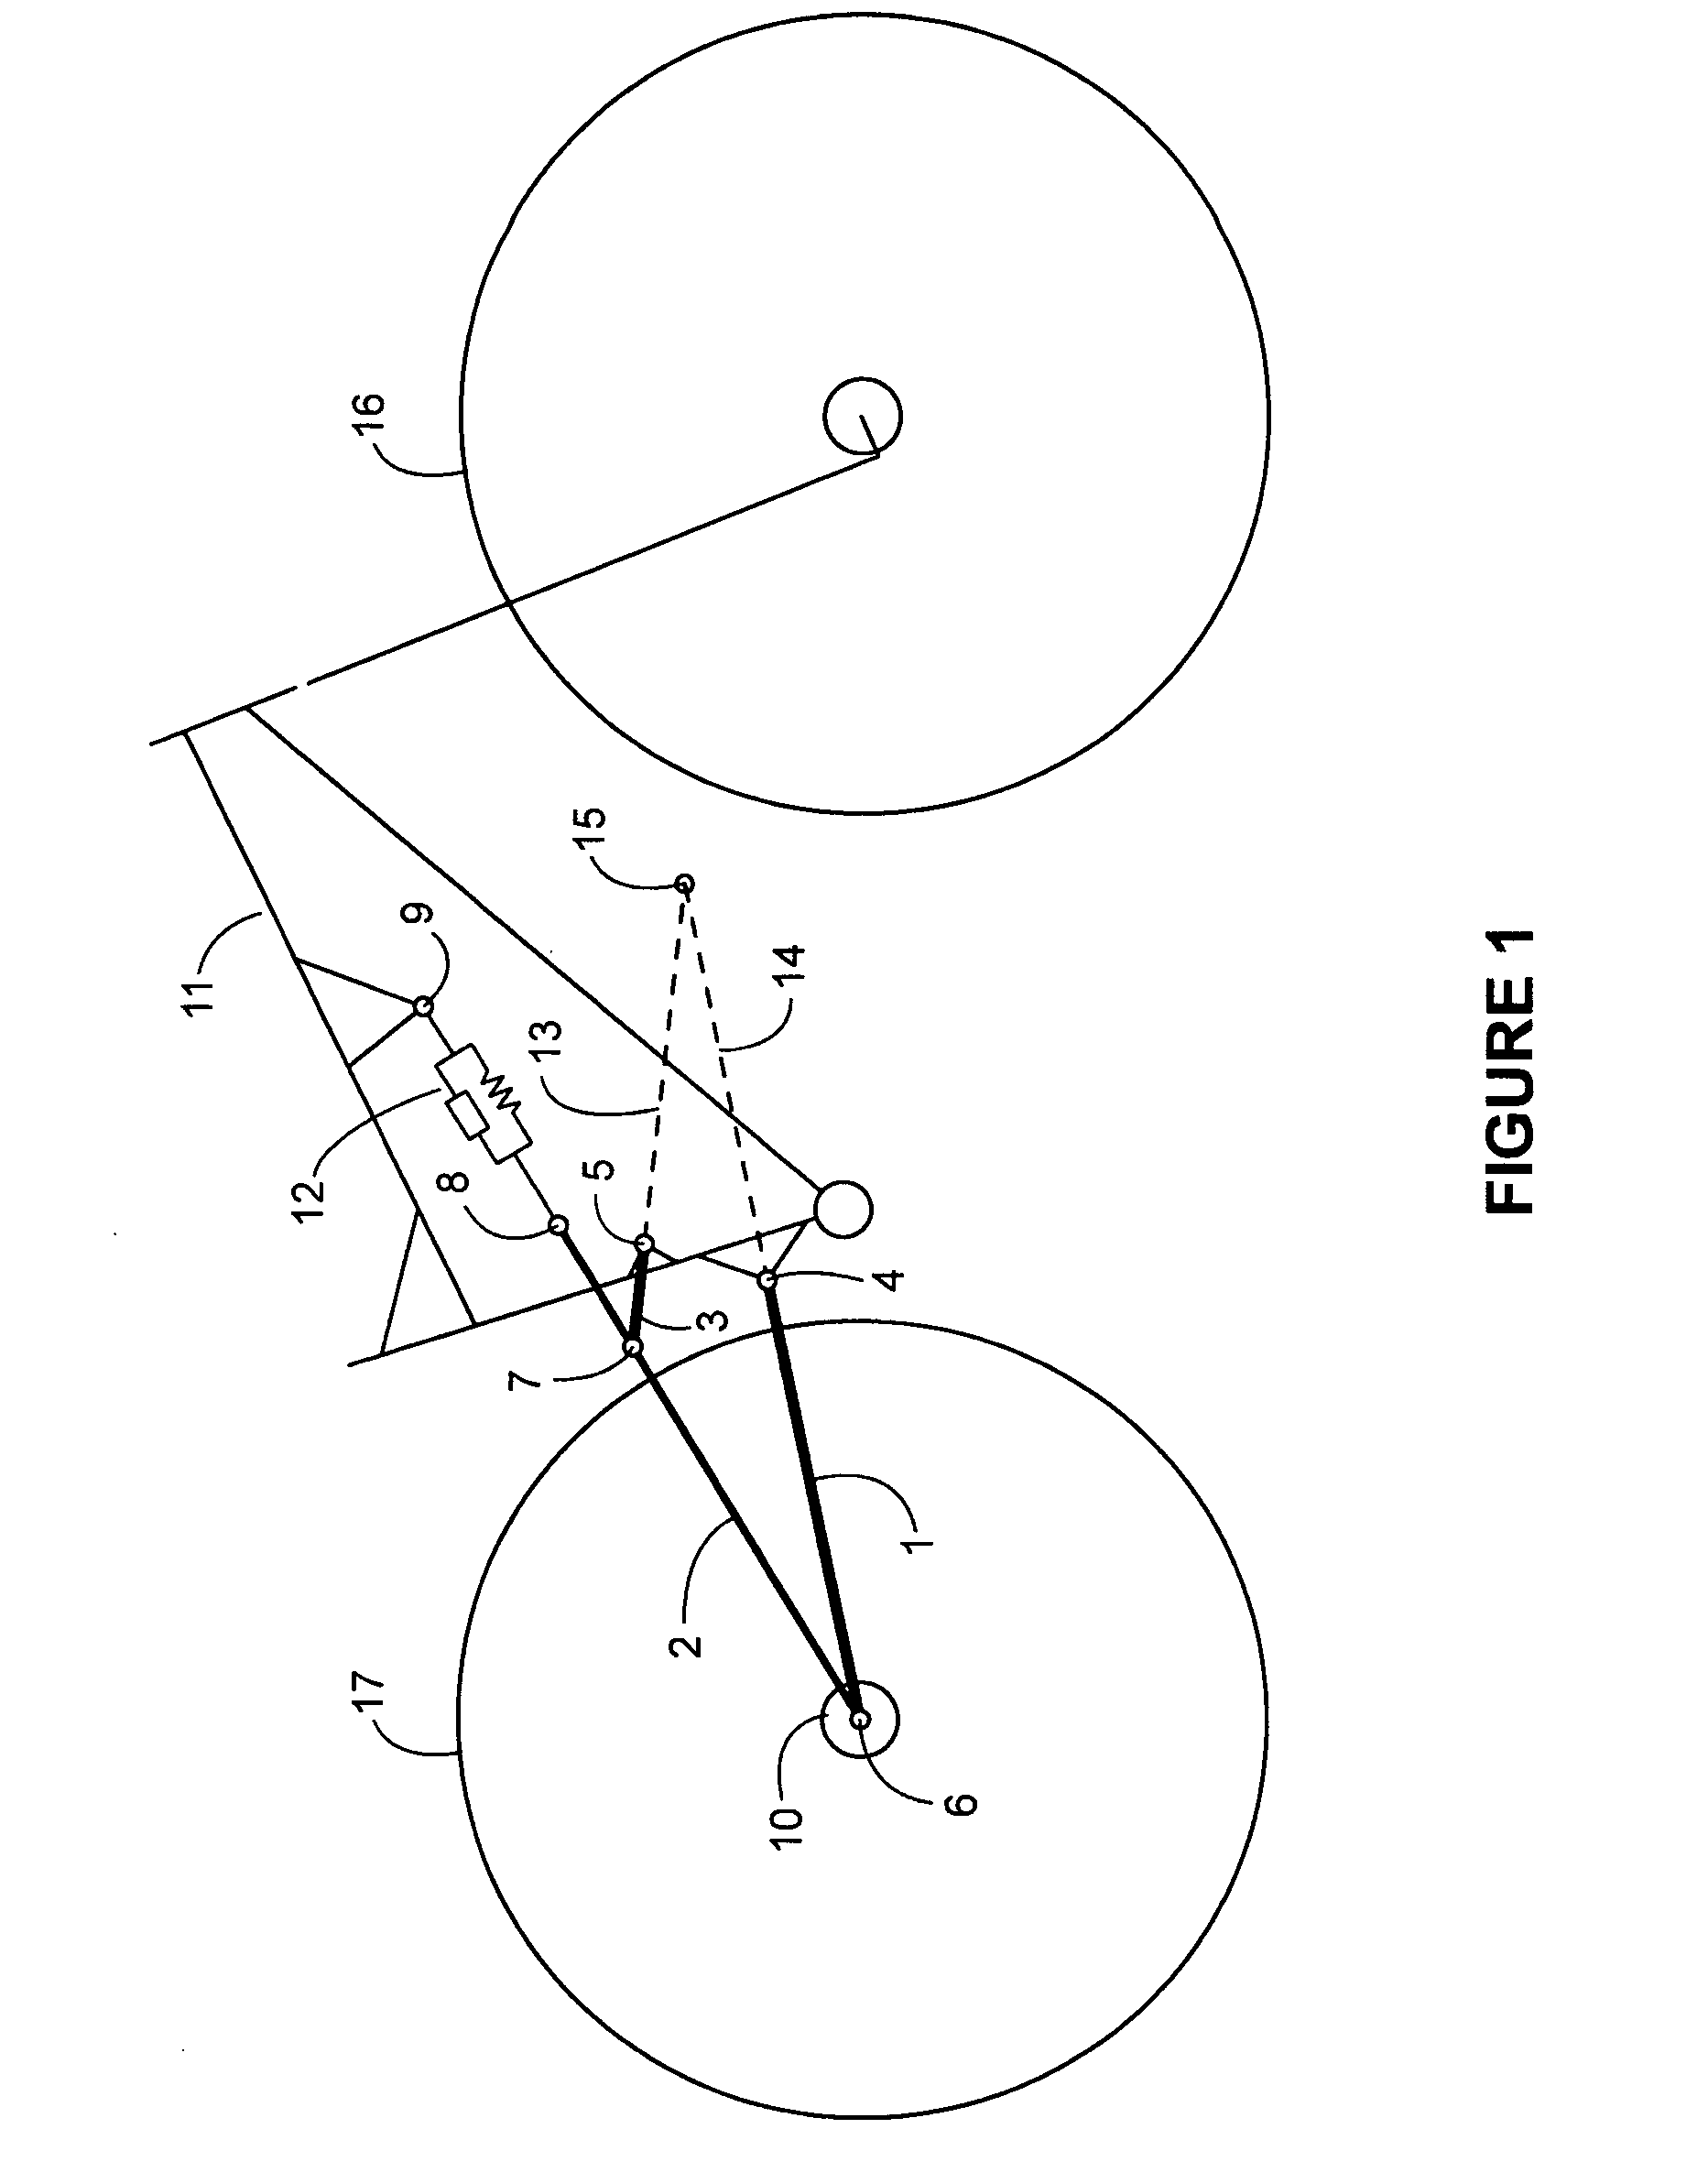 Vehicle suspension systems for seperated acceleration responses